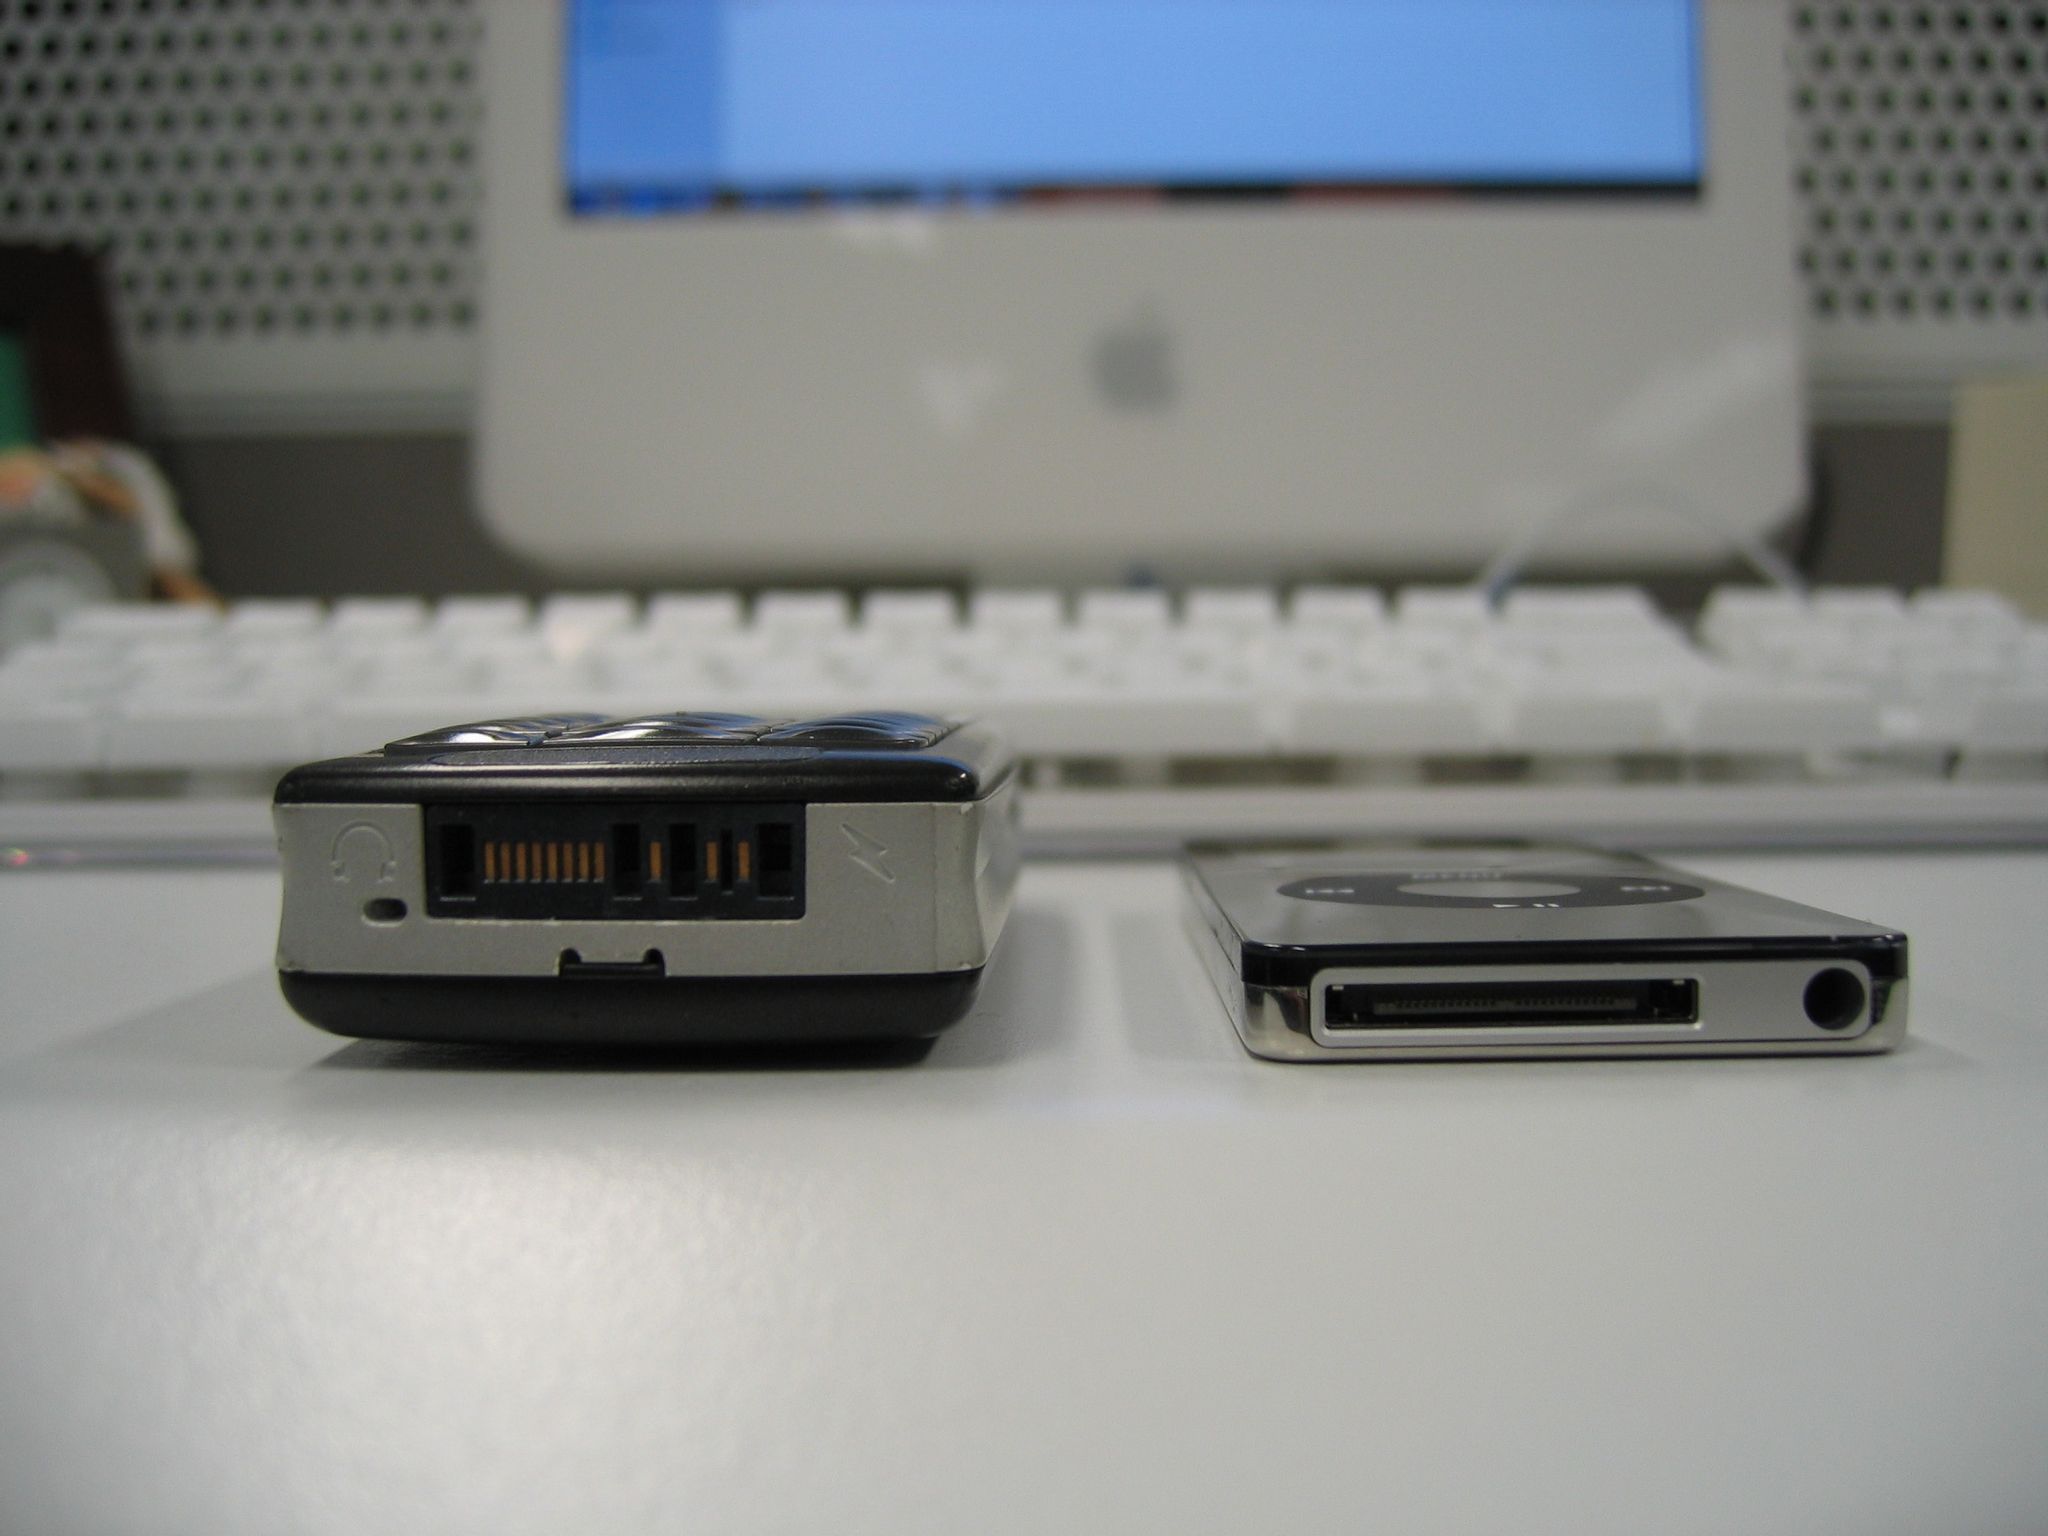 A photo of the bottom of an iPod nano sitting alongside a Sony-Ericsson T630 phone. The phone is HILARIOUSLY thick in comparison to the iPod.